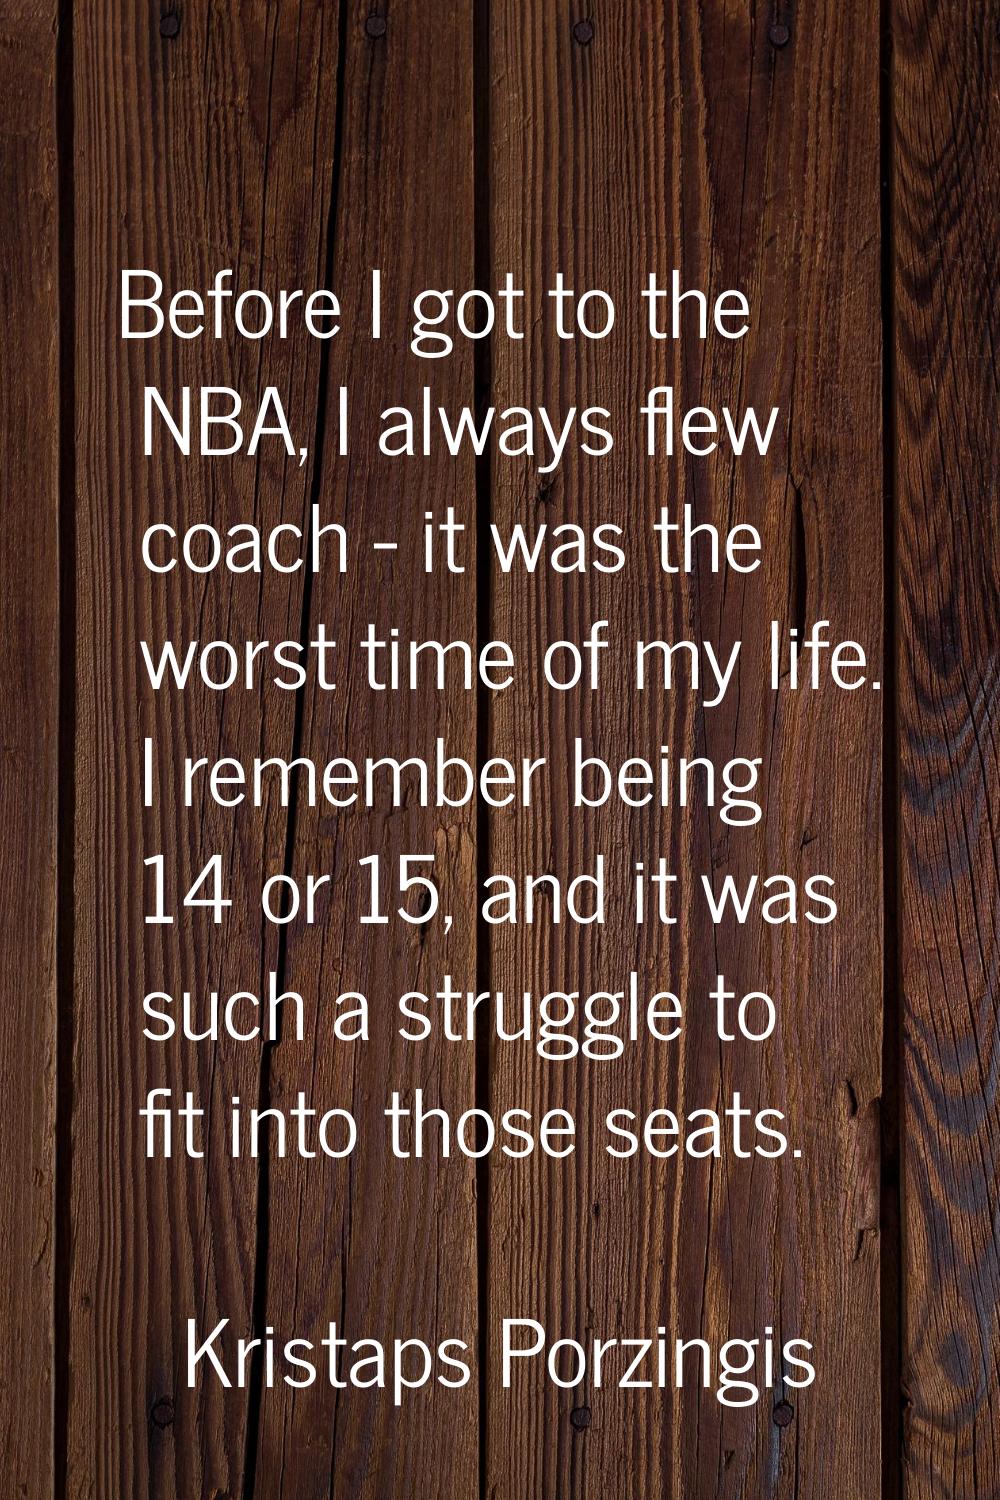 Before I got to the NBA, I always flew coach - it was the worst time of my life. I remember being 1